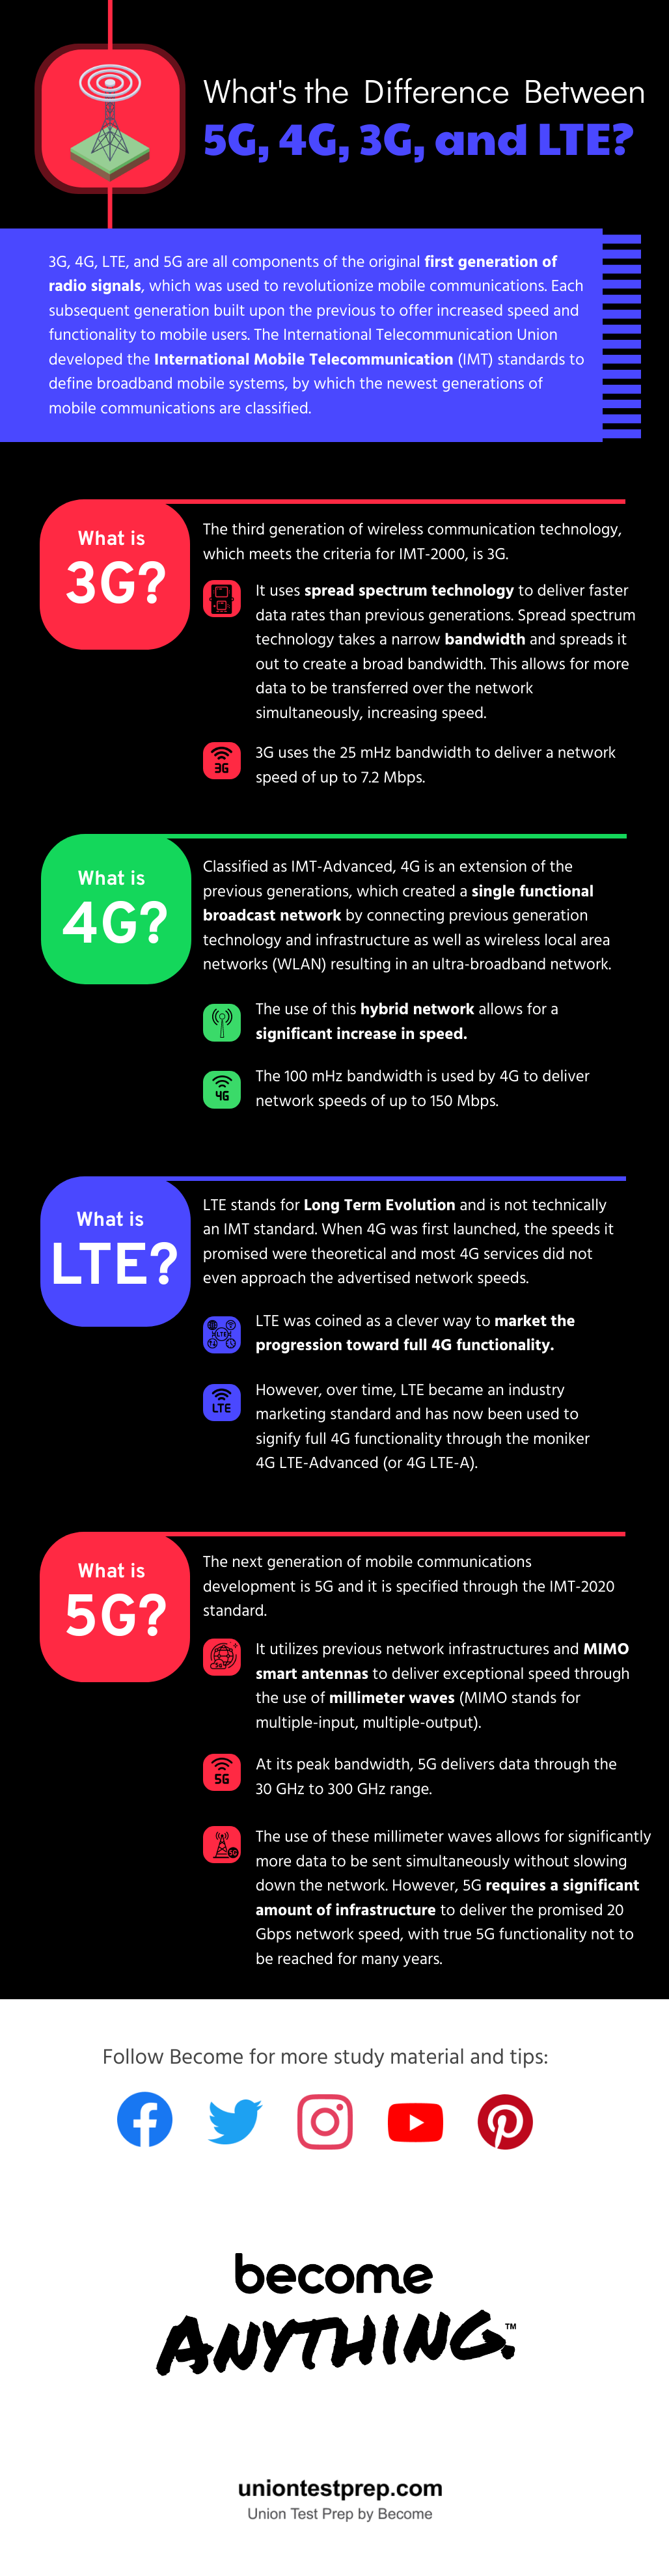 What's the Difference Between 3G, 4G, 5G and LTE?